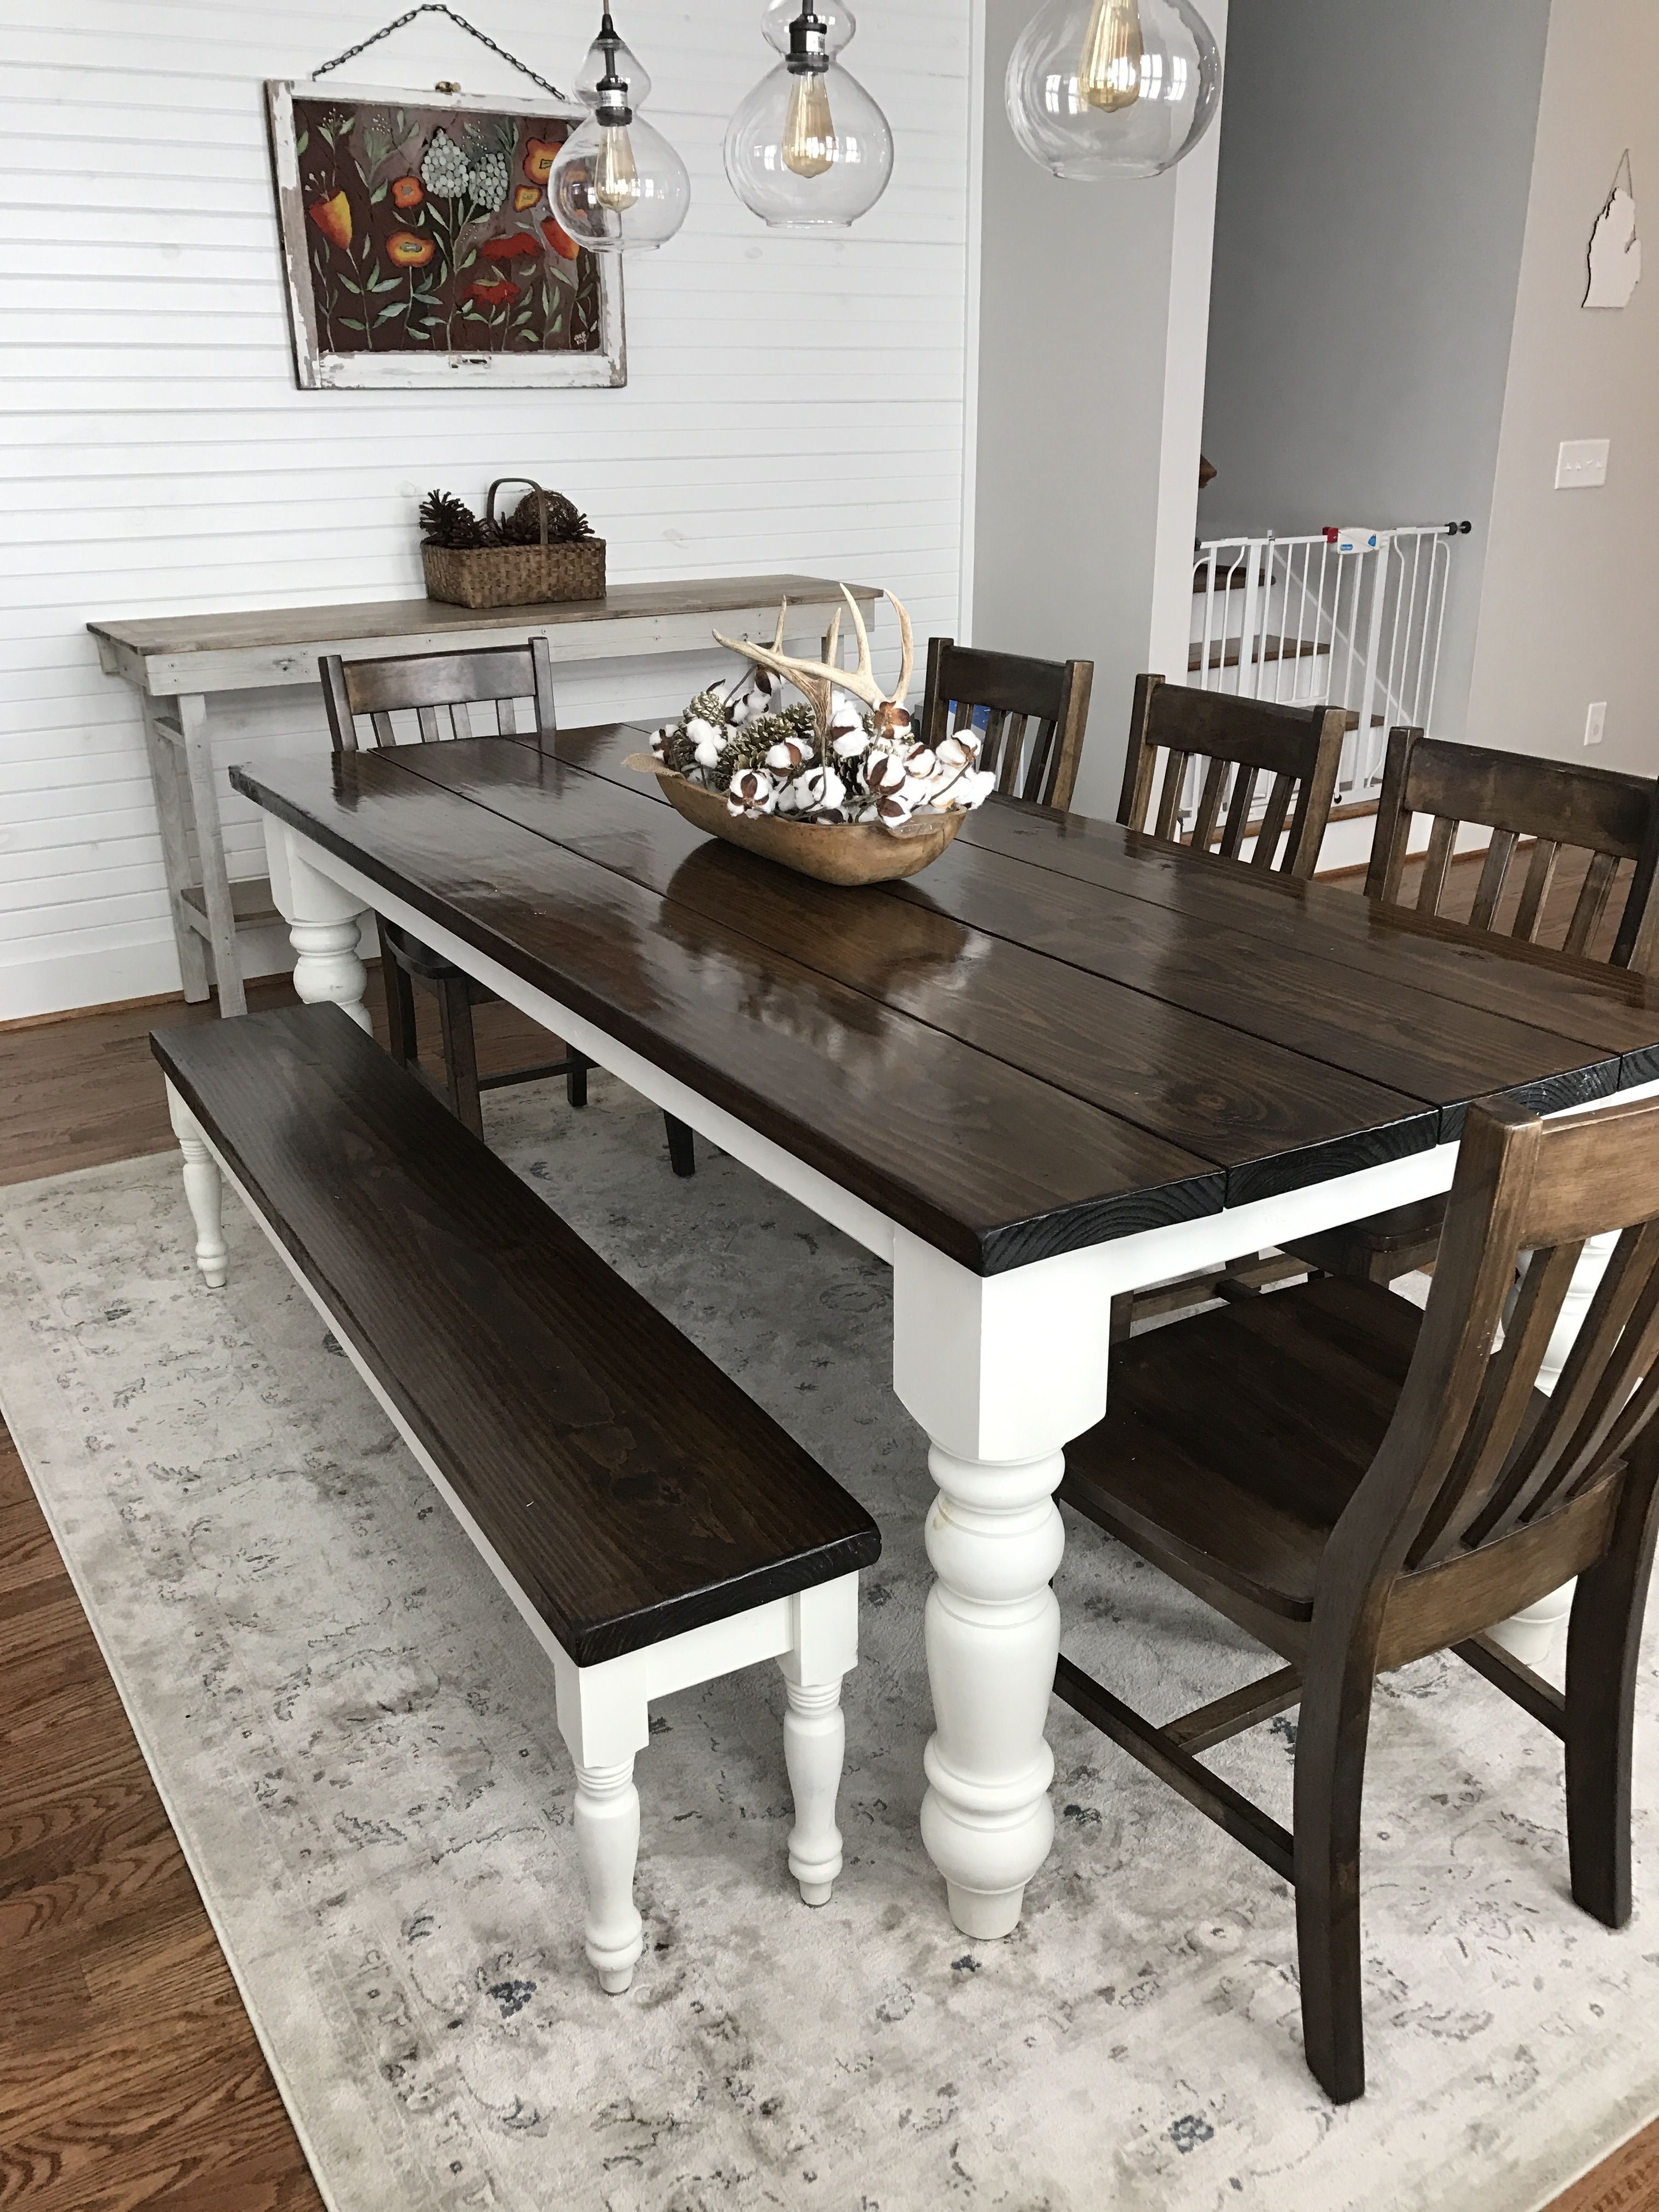 Baluster Turned Leg Table In 2018 | Decor Ideas | Pinterest | Dining Inside Latest Kirsten 6 Piece Dining Sets (View 7 of 20)